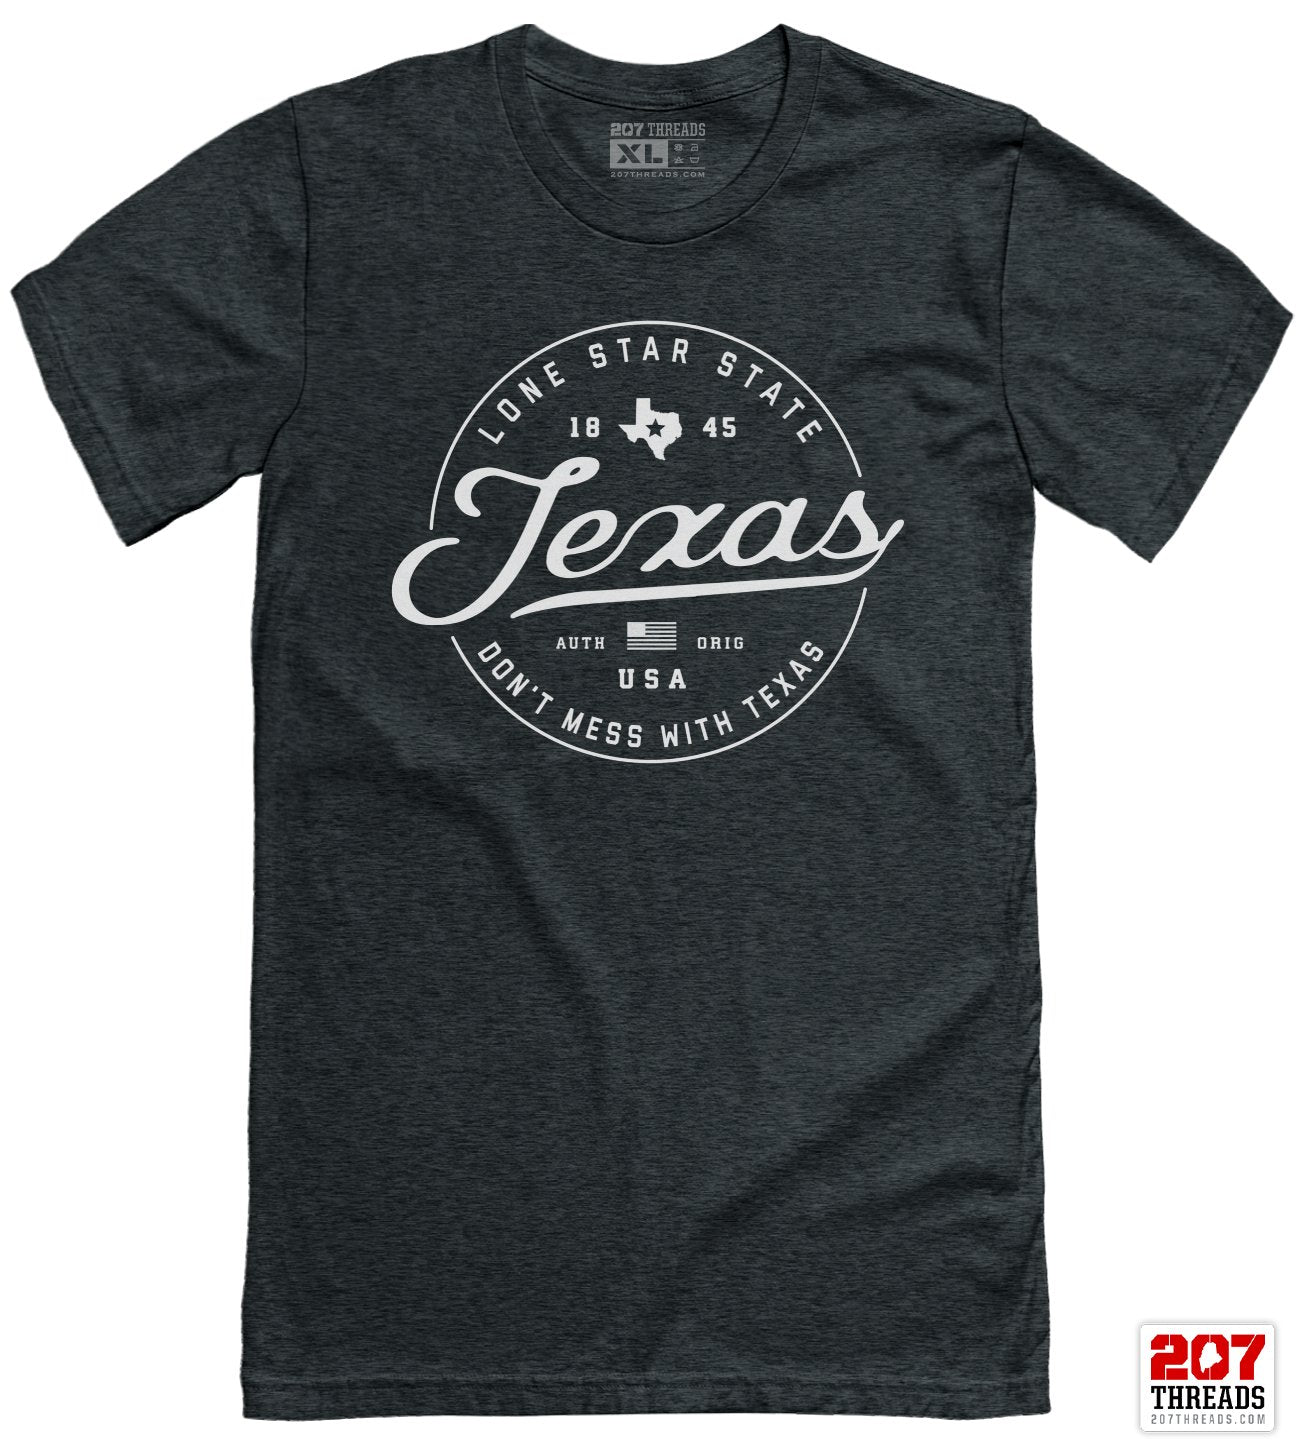 State of Texas T-Shirt - Soft Texas Vacation Tee